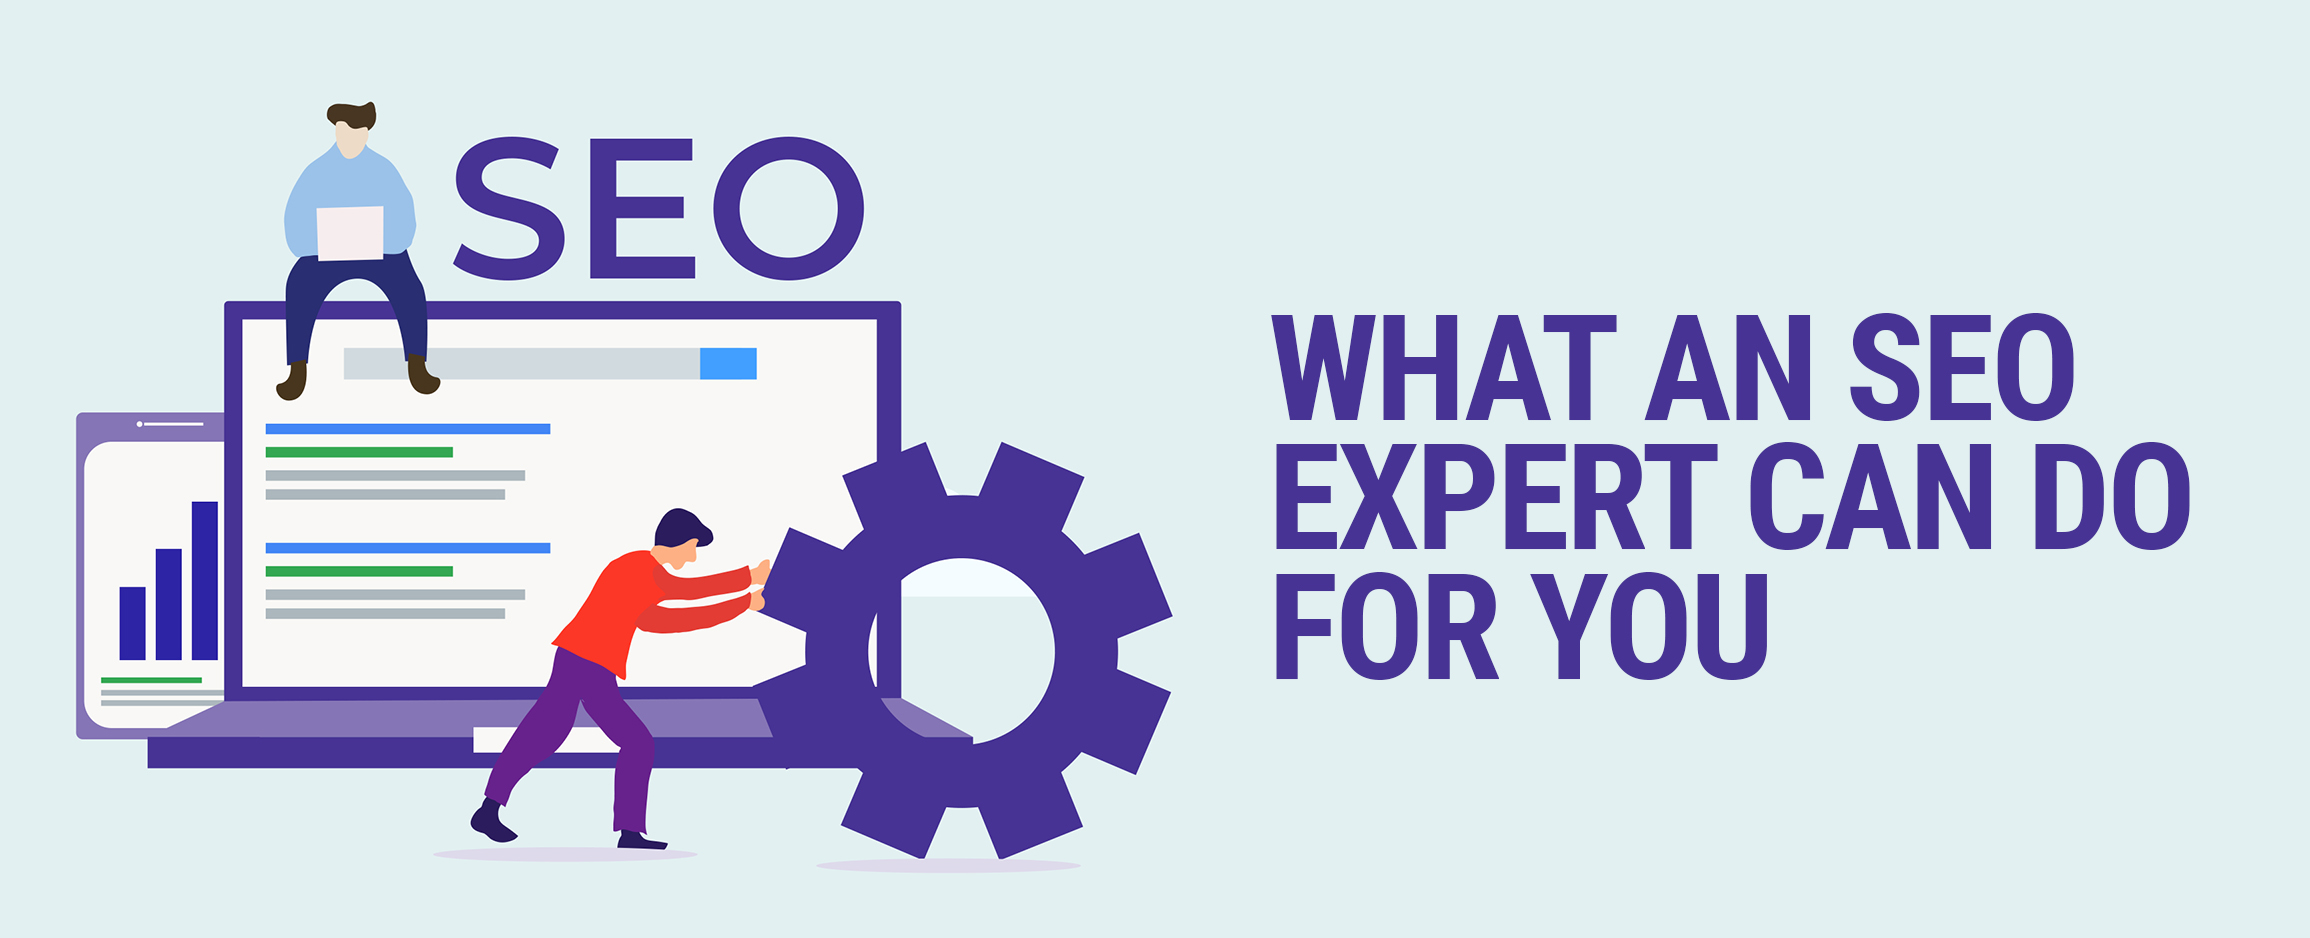 What an SEO Expert Can Do For You